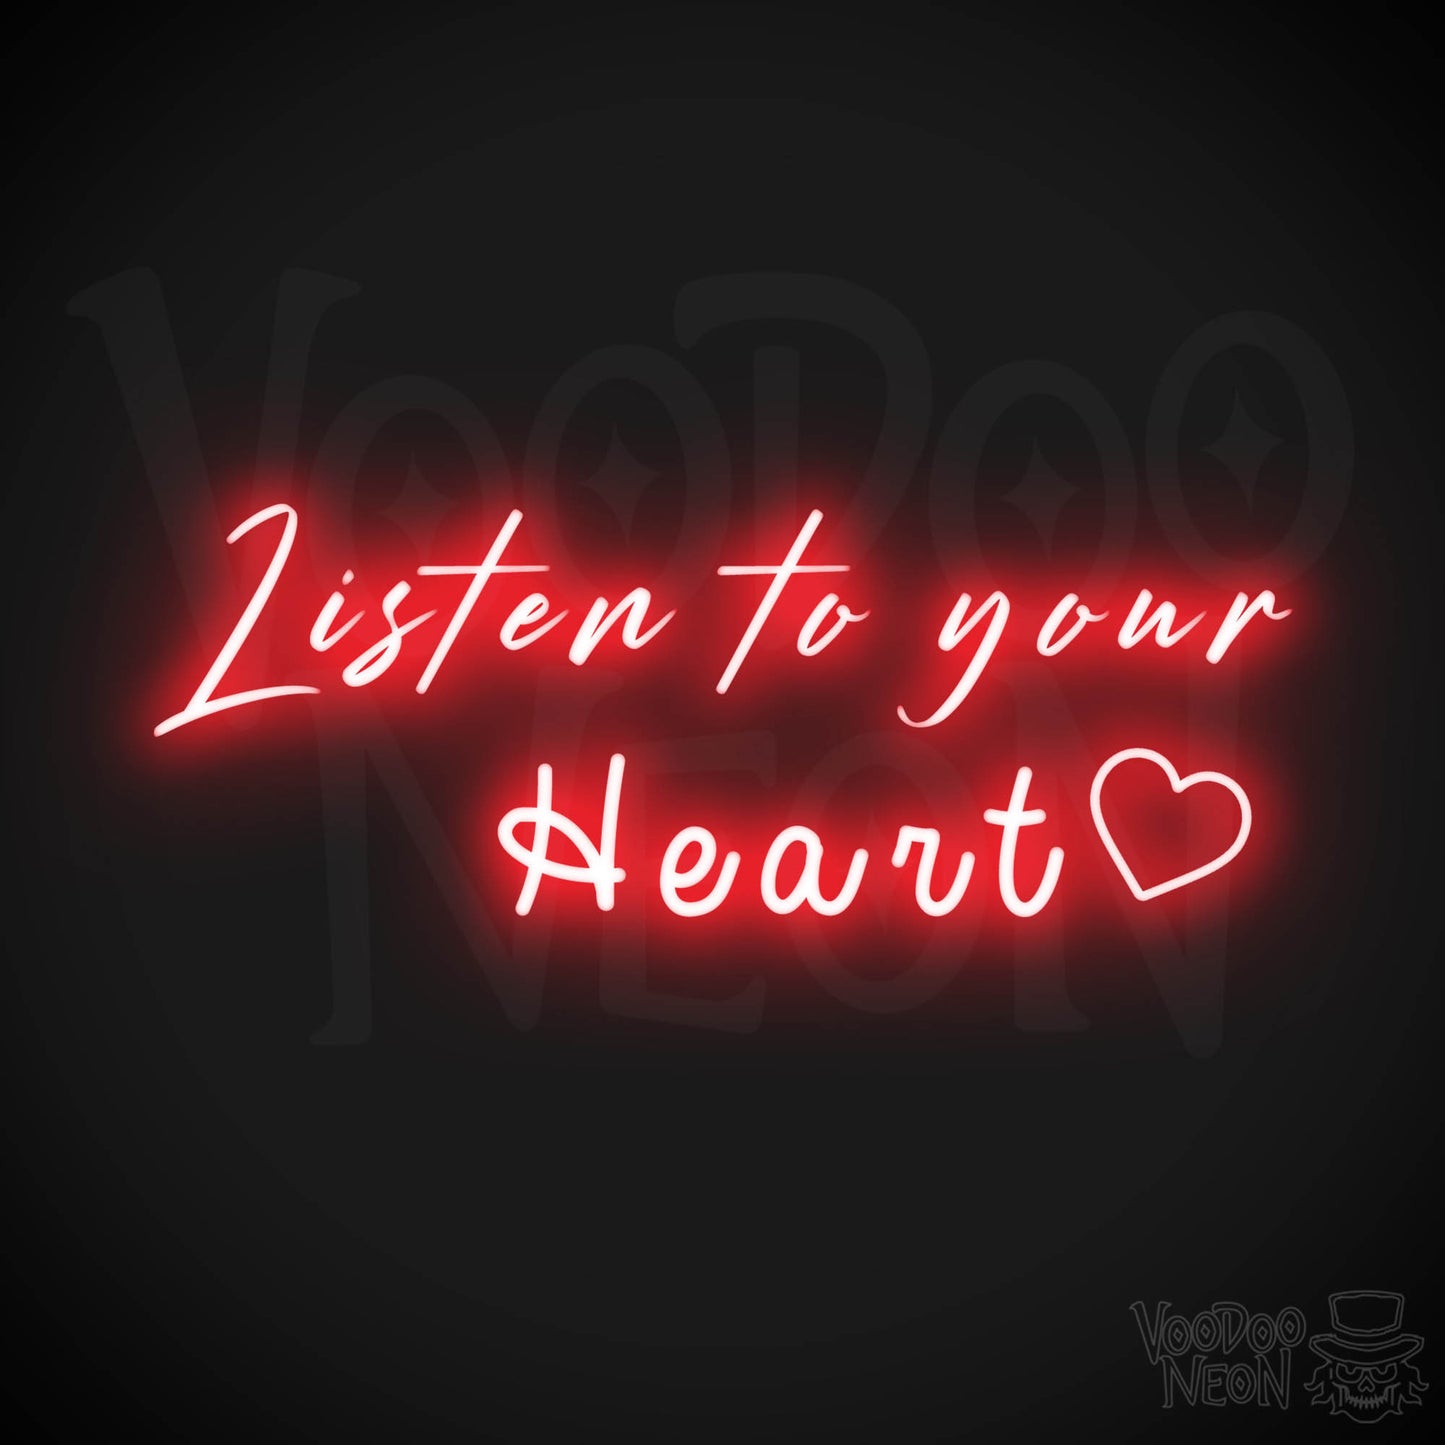 Listen To Your Heart Neon Sign - Neon Listen To Your Heart Sign - Wedding Sign - Color Red